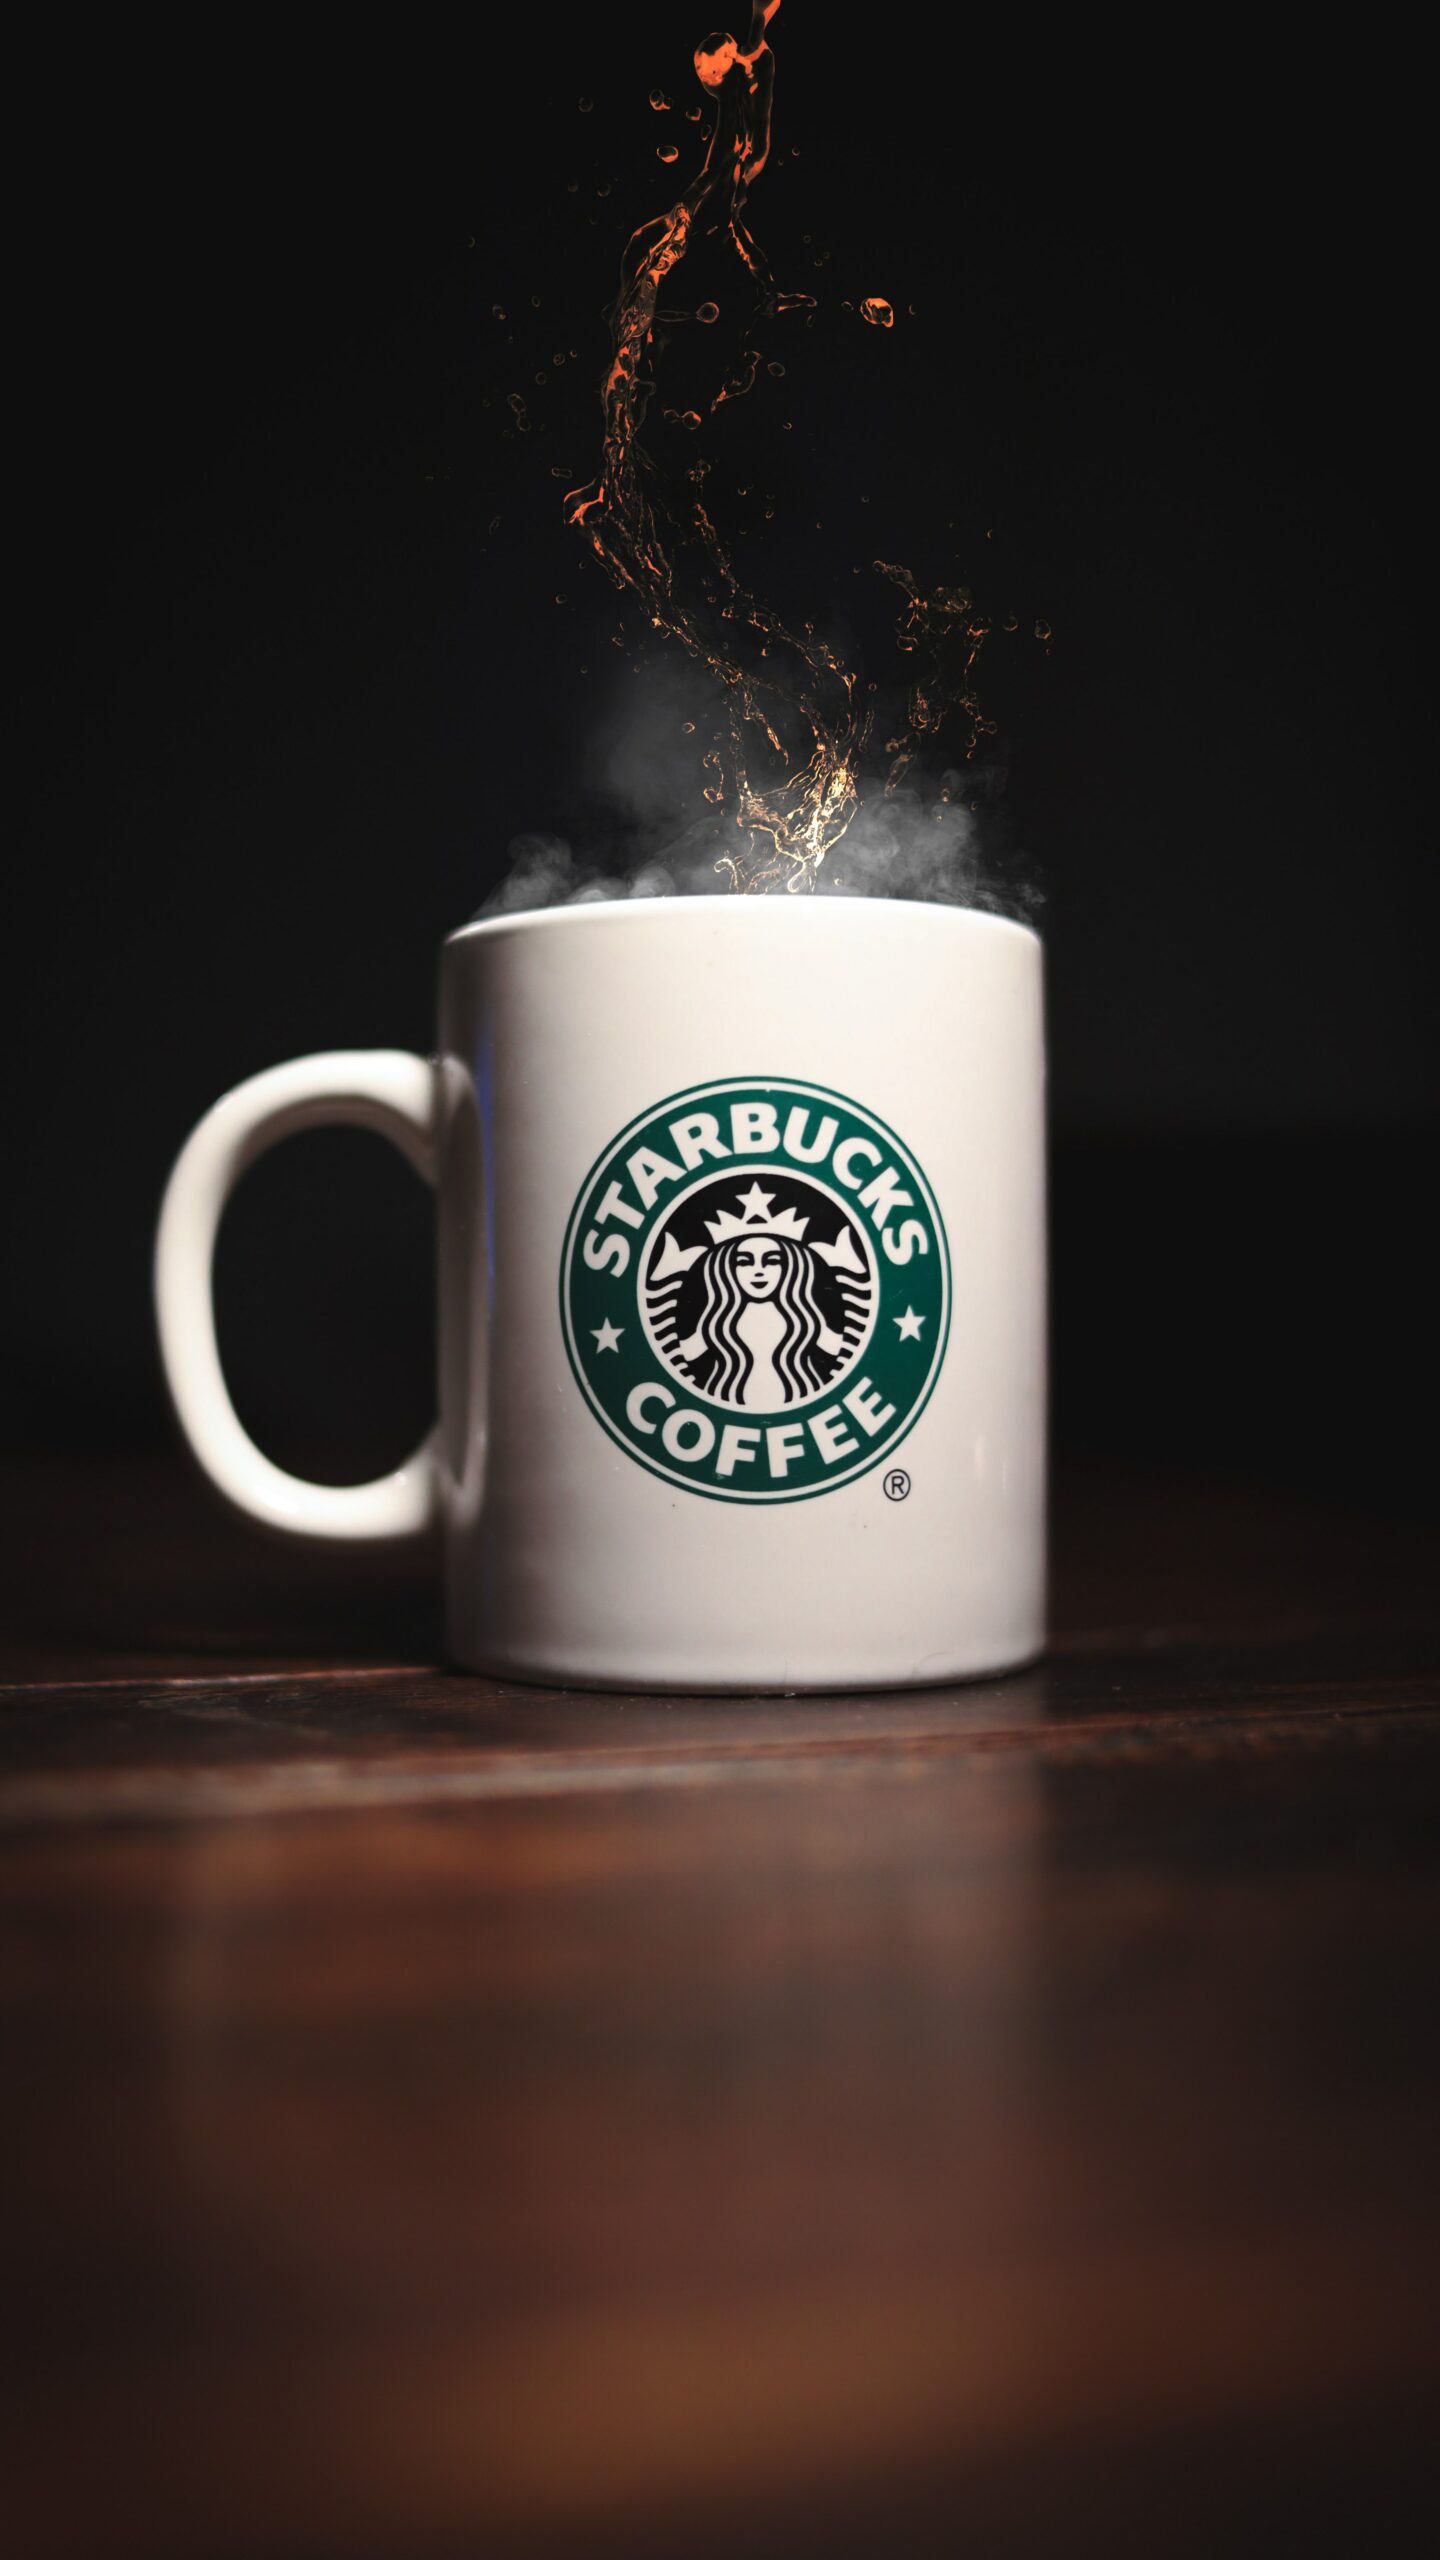 Starbucks' Ethically Sourced Coffee and Tea Claims - Truth in Advertising